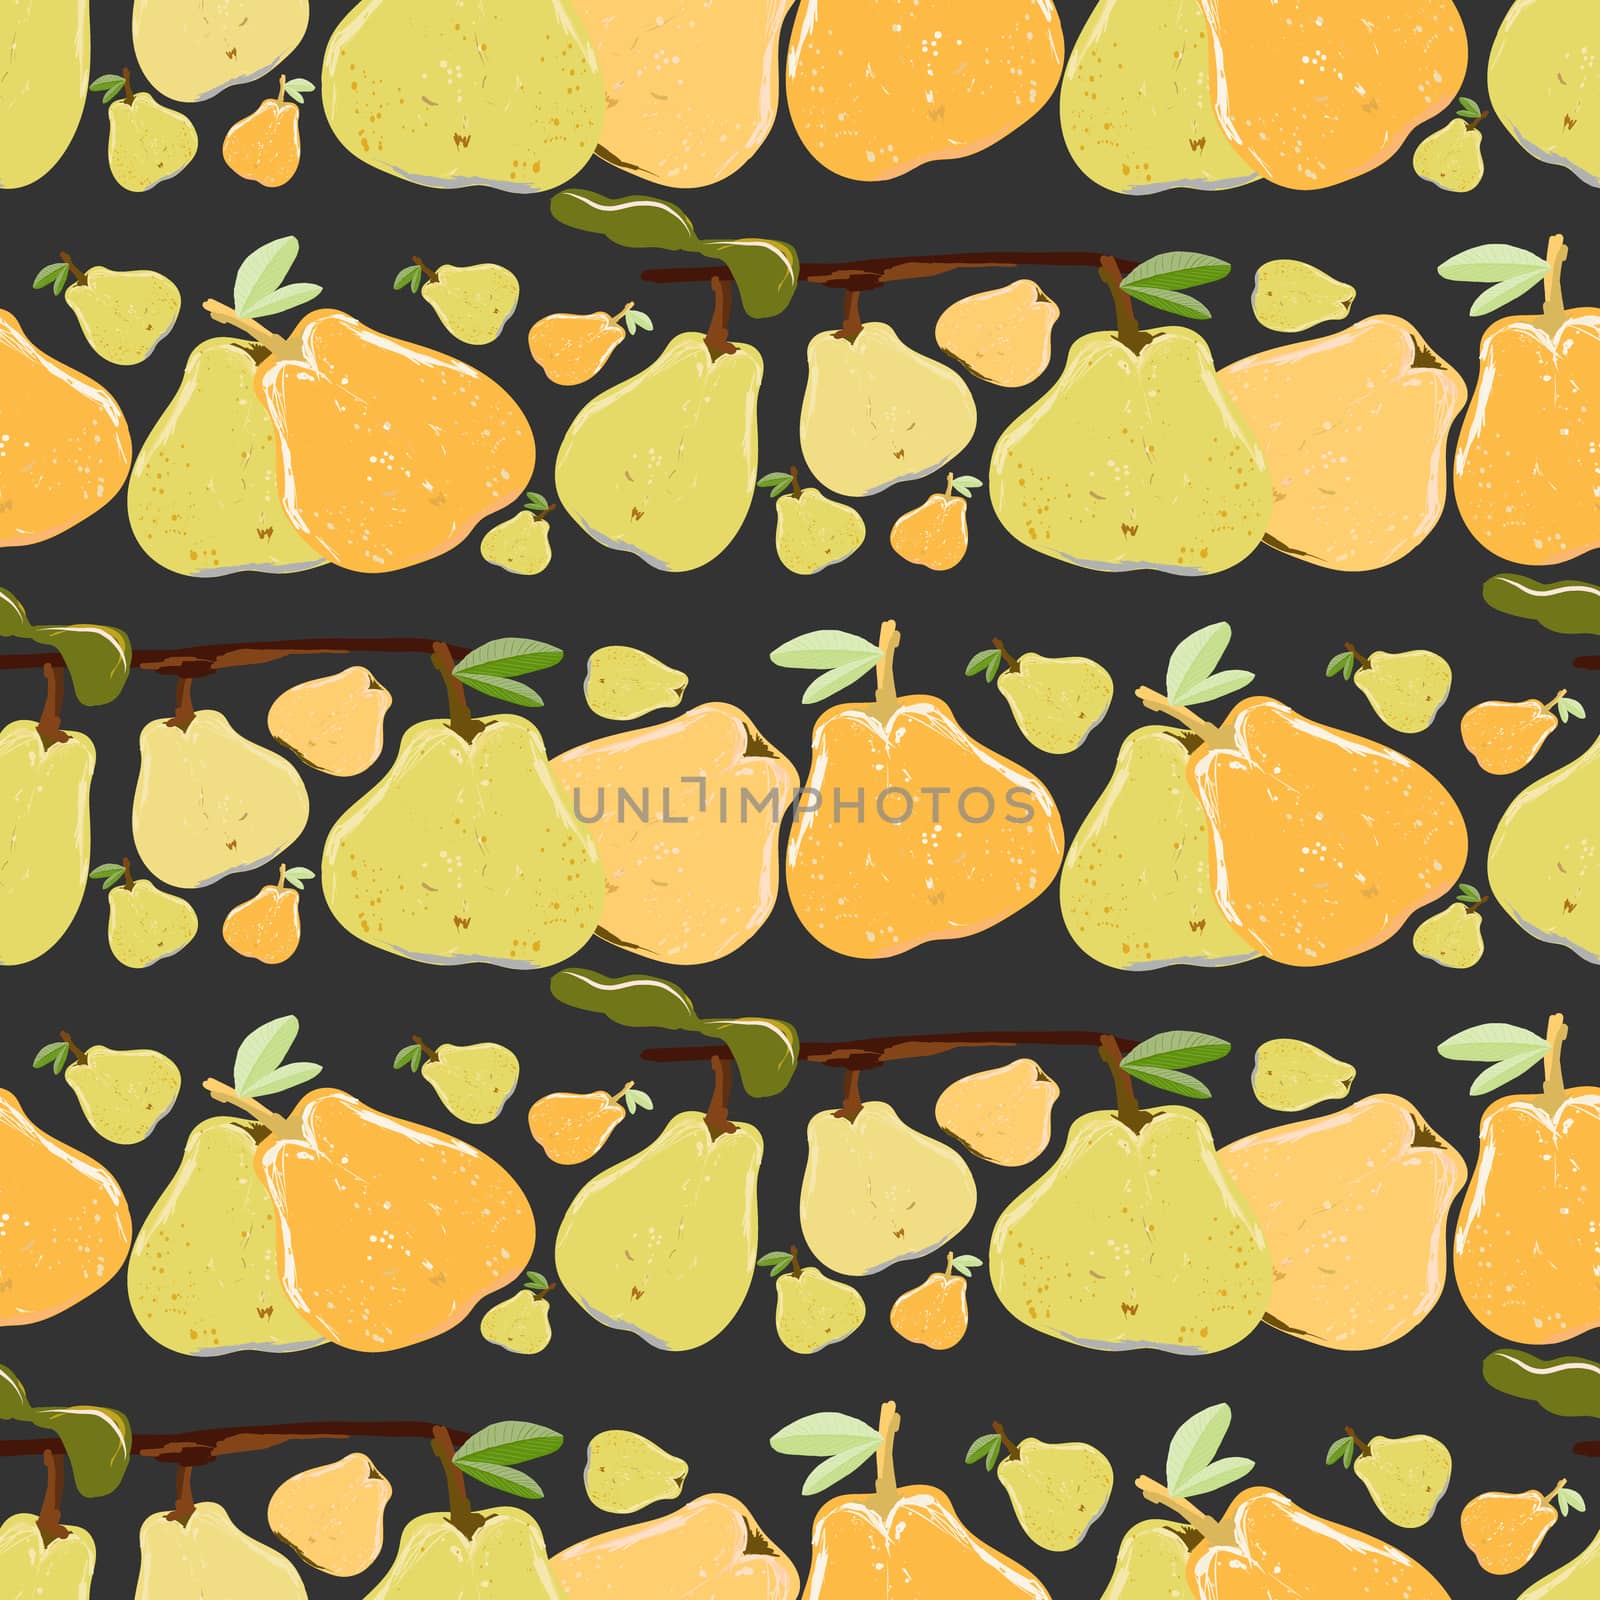 Yellow and orange juicy pears seamless pattern on a black background. by Nata_Prando